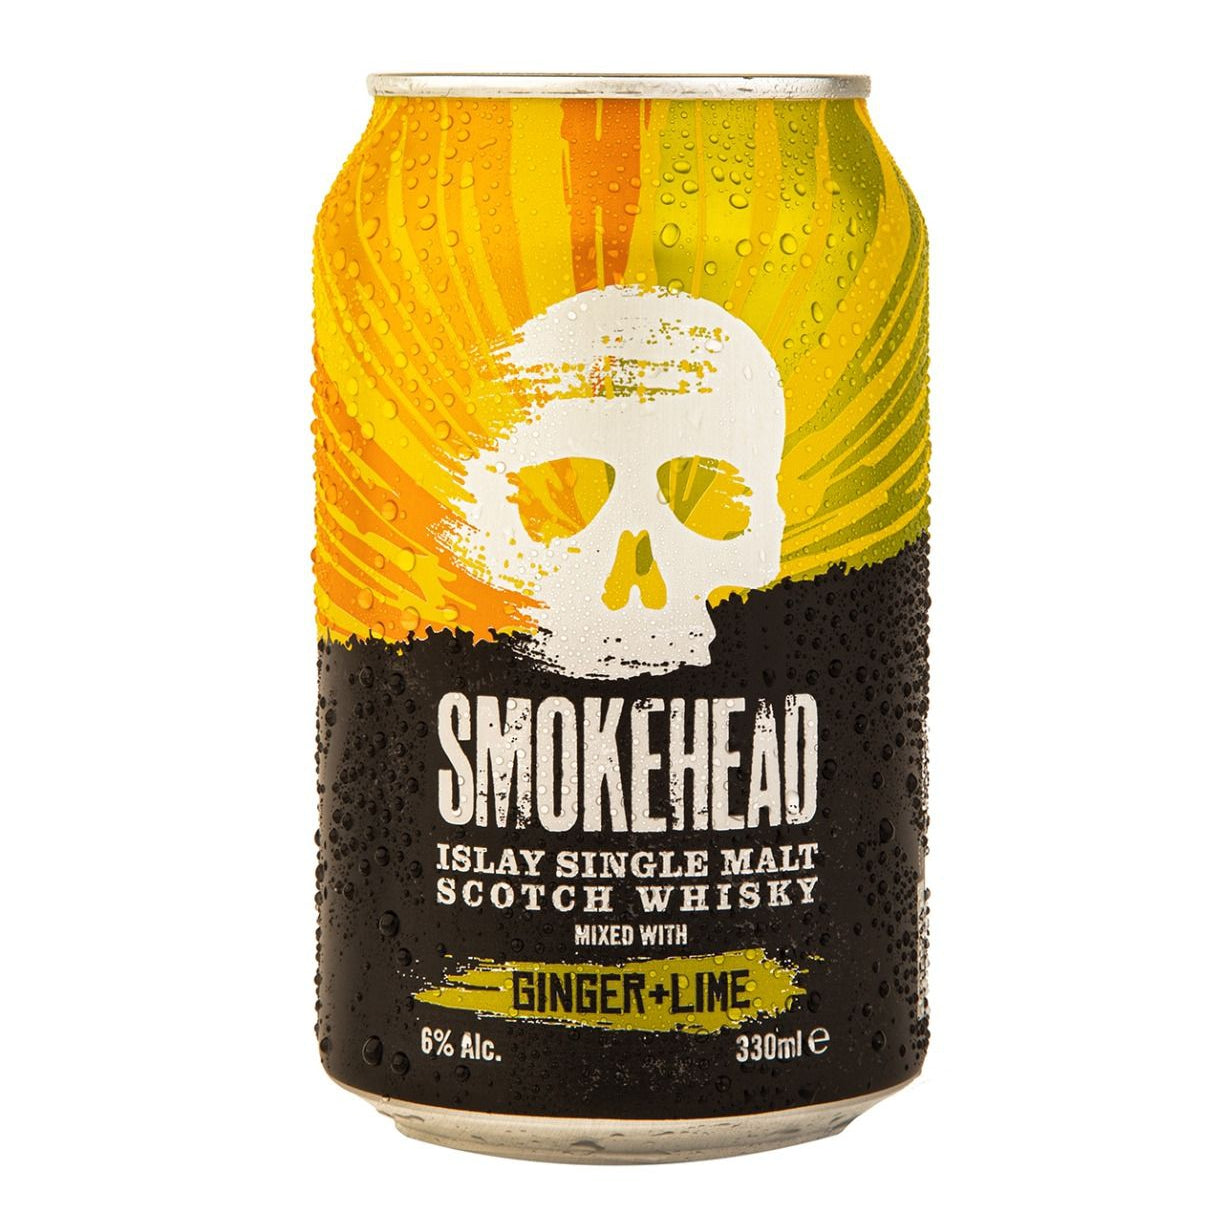 Smokehead Islay Single Malt Scotch Whisky Mixed With Ginger & Lime 330ml-RTD's (Ready To Drink)-5010852046953-Fountainhall Wines